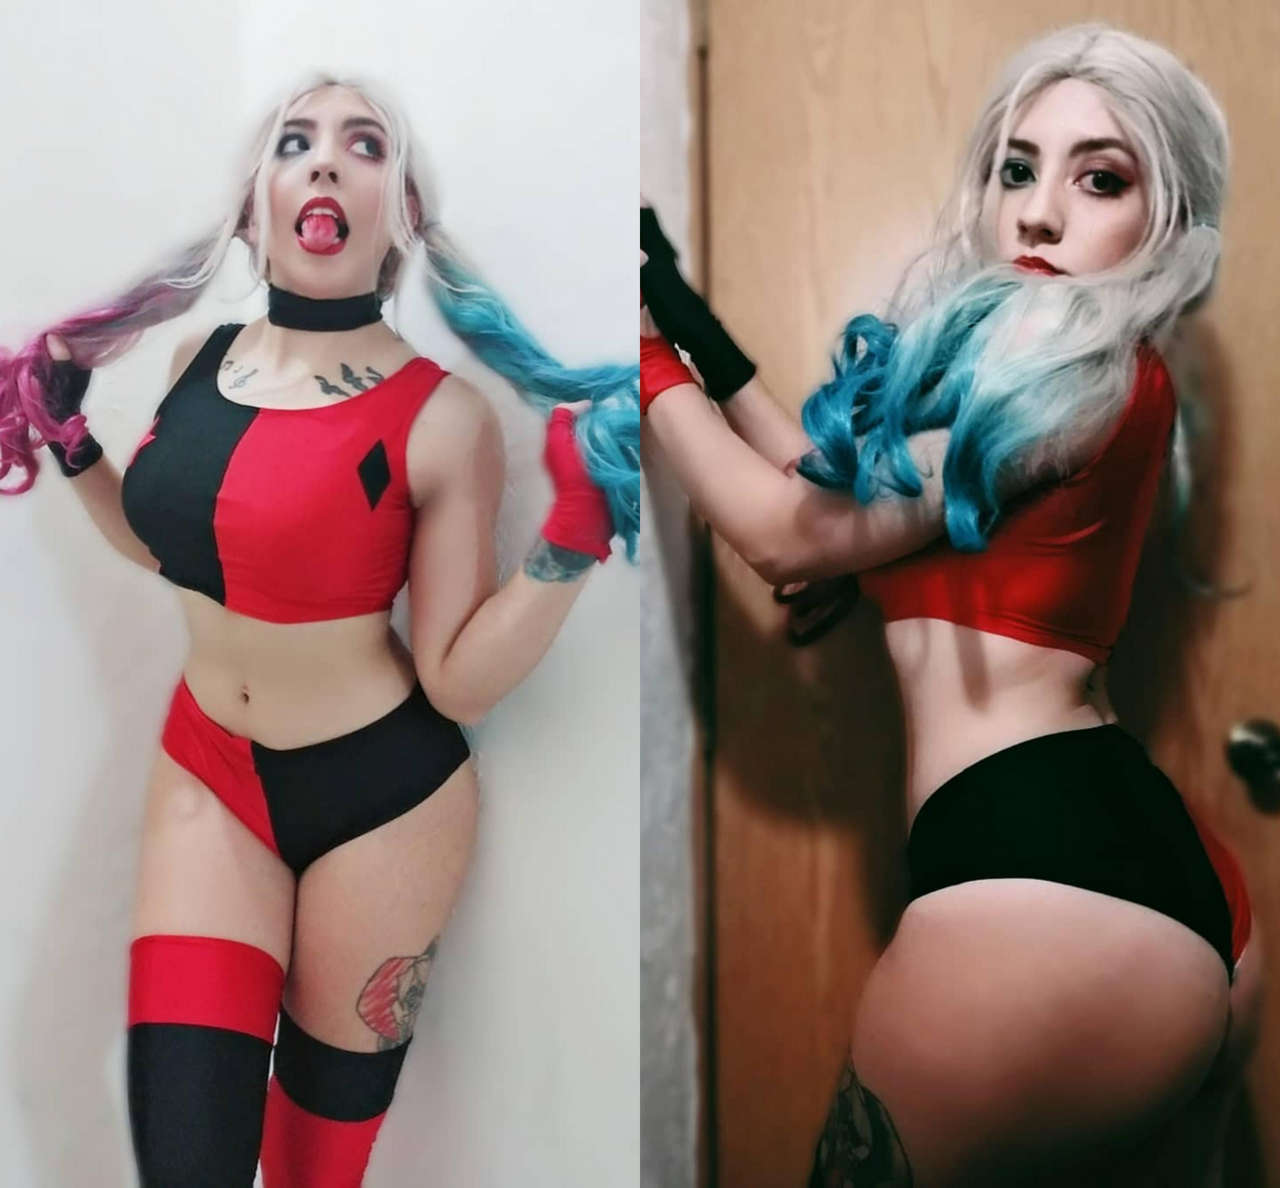 Stolenbrush As Harley Quin